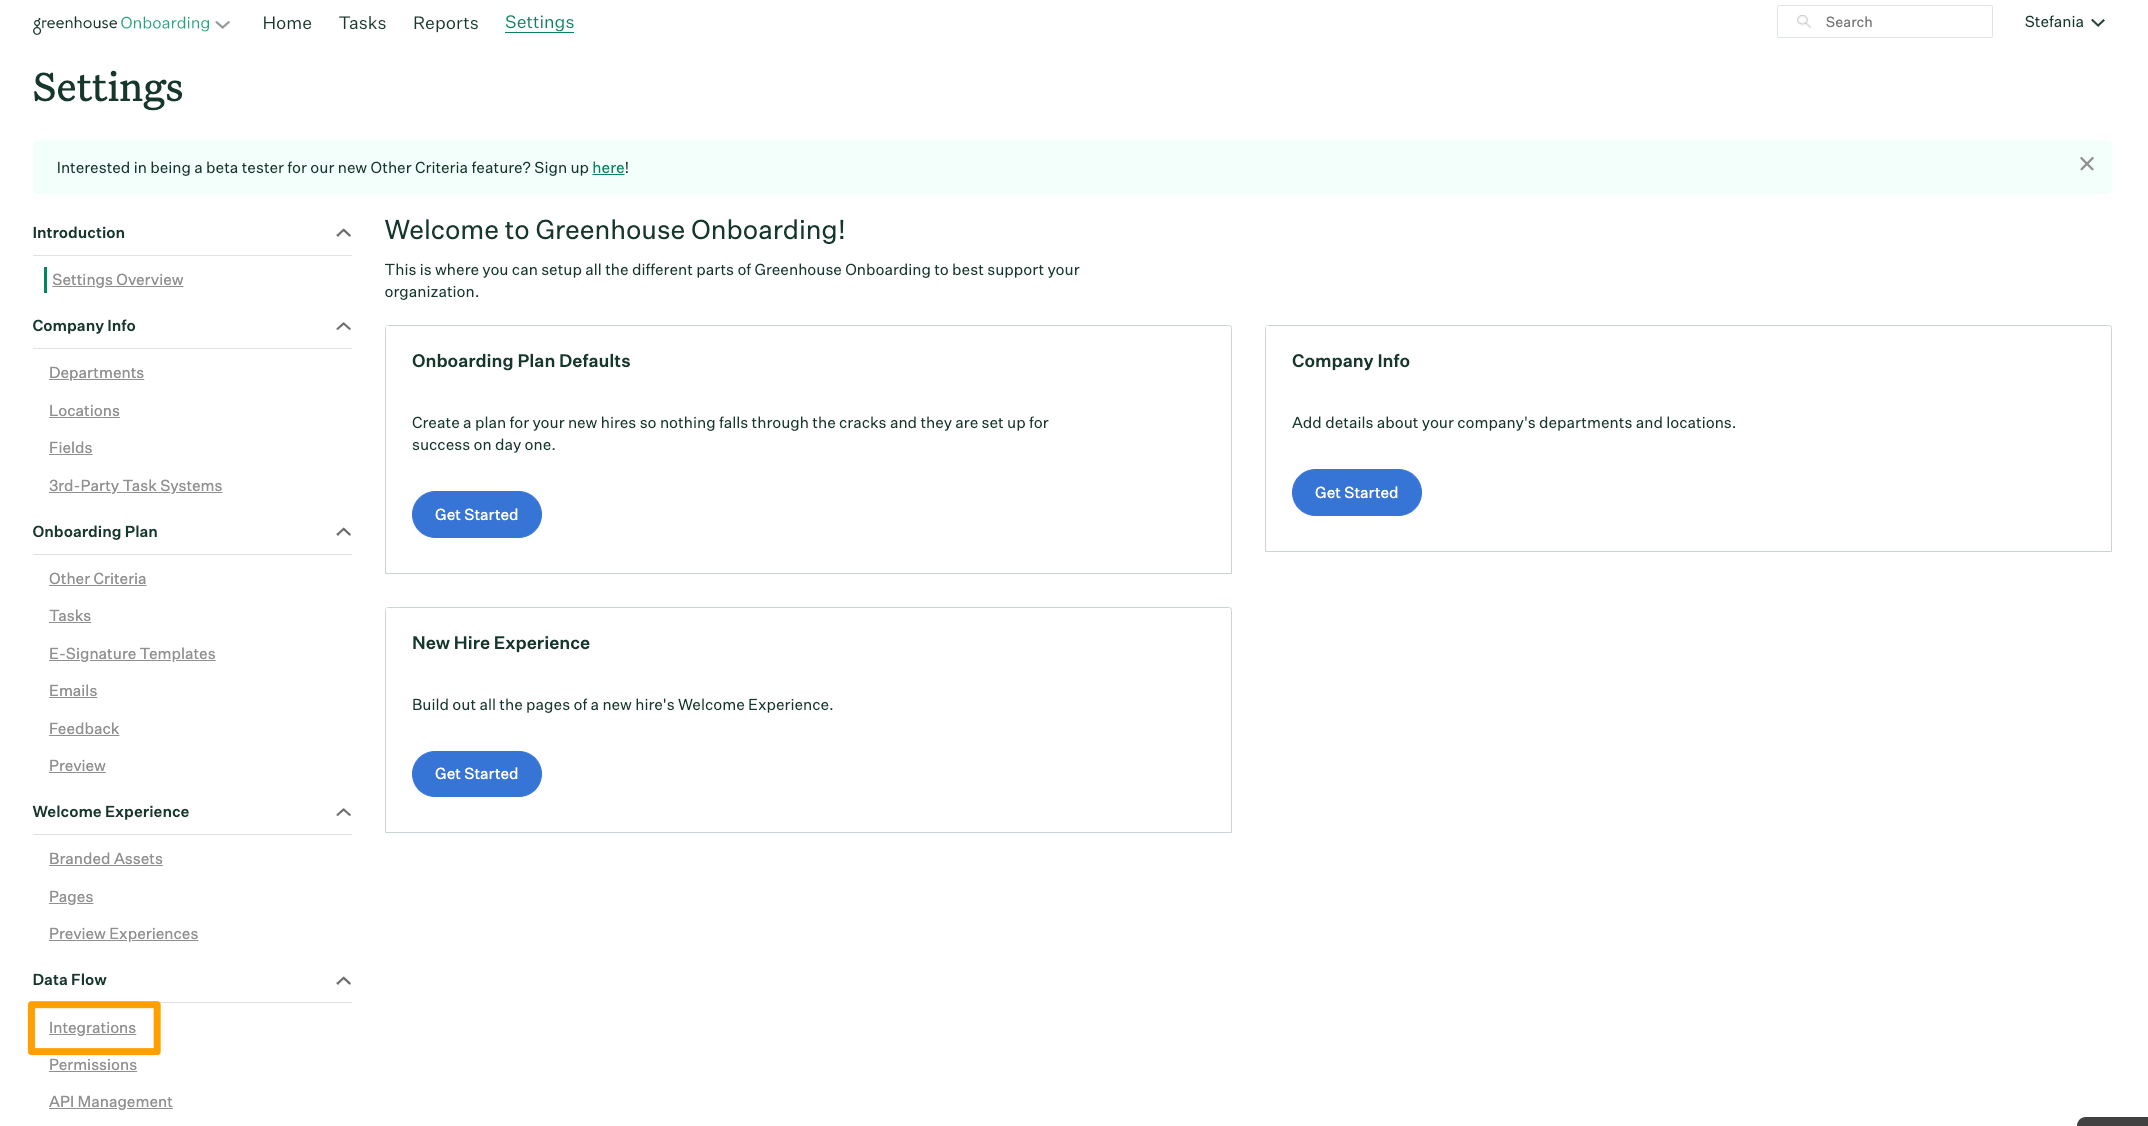 Greenhouse Onboarding page shows the Integrations button highlighted in a marigold emphasis box